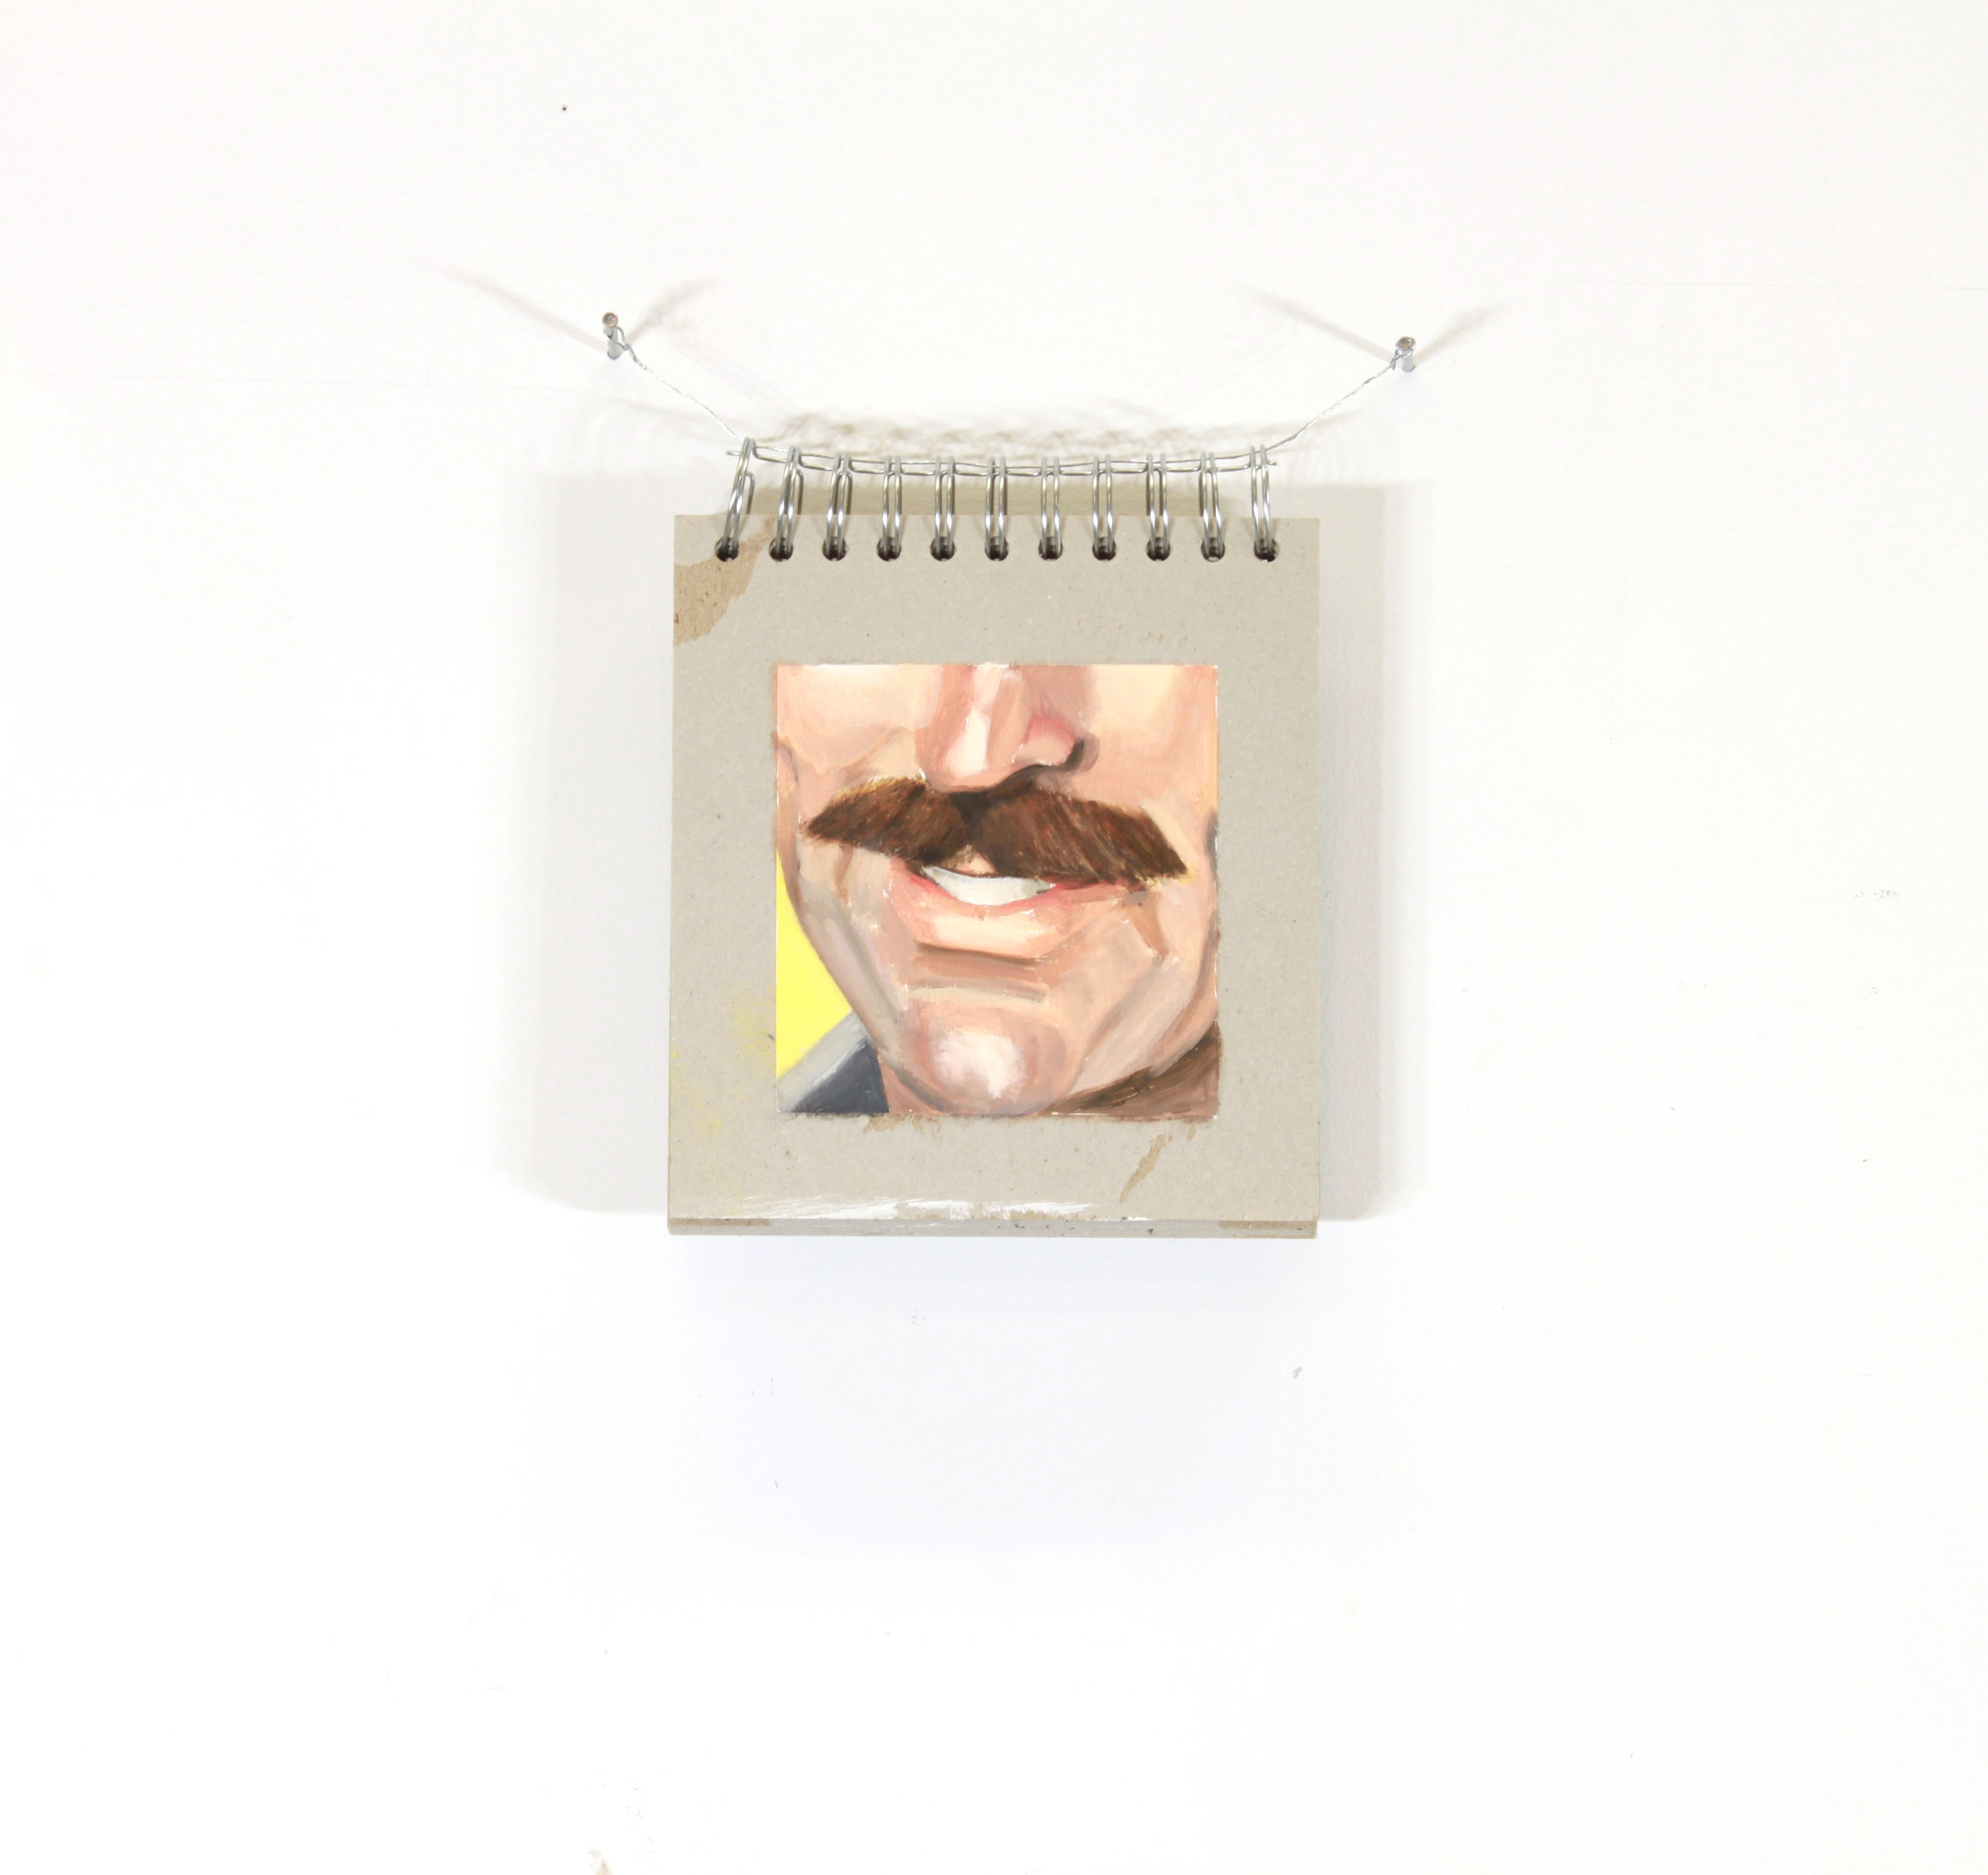   Moustache Book  (detail) ,  2017  Oil on cardboard  Approximately 6” x 5.5” 